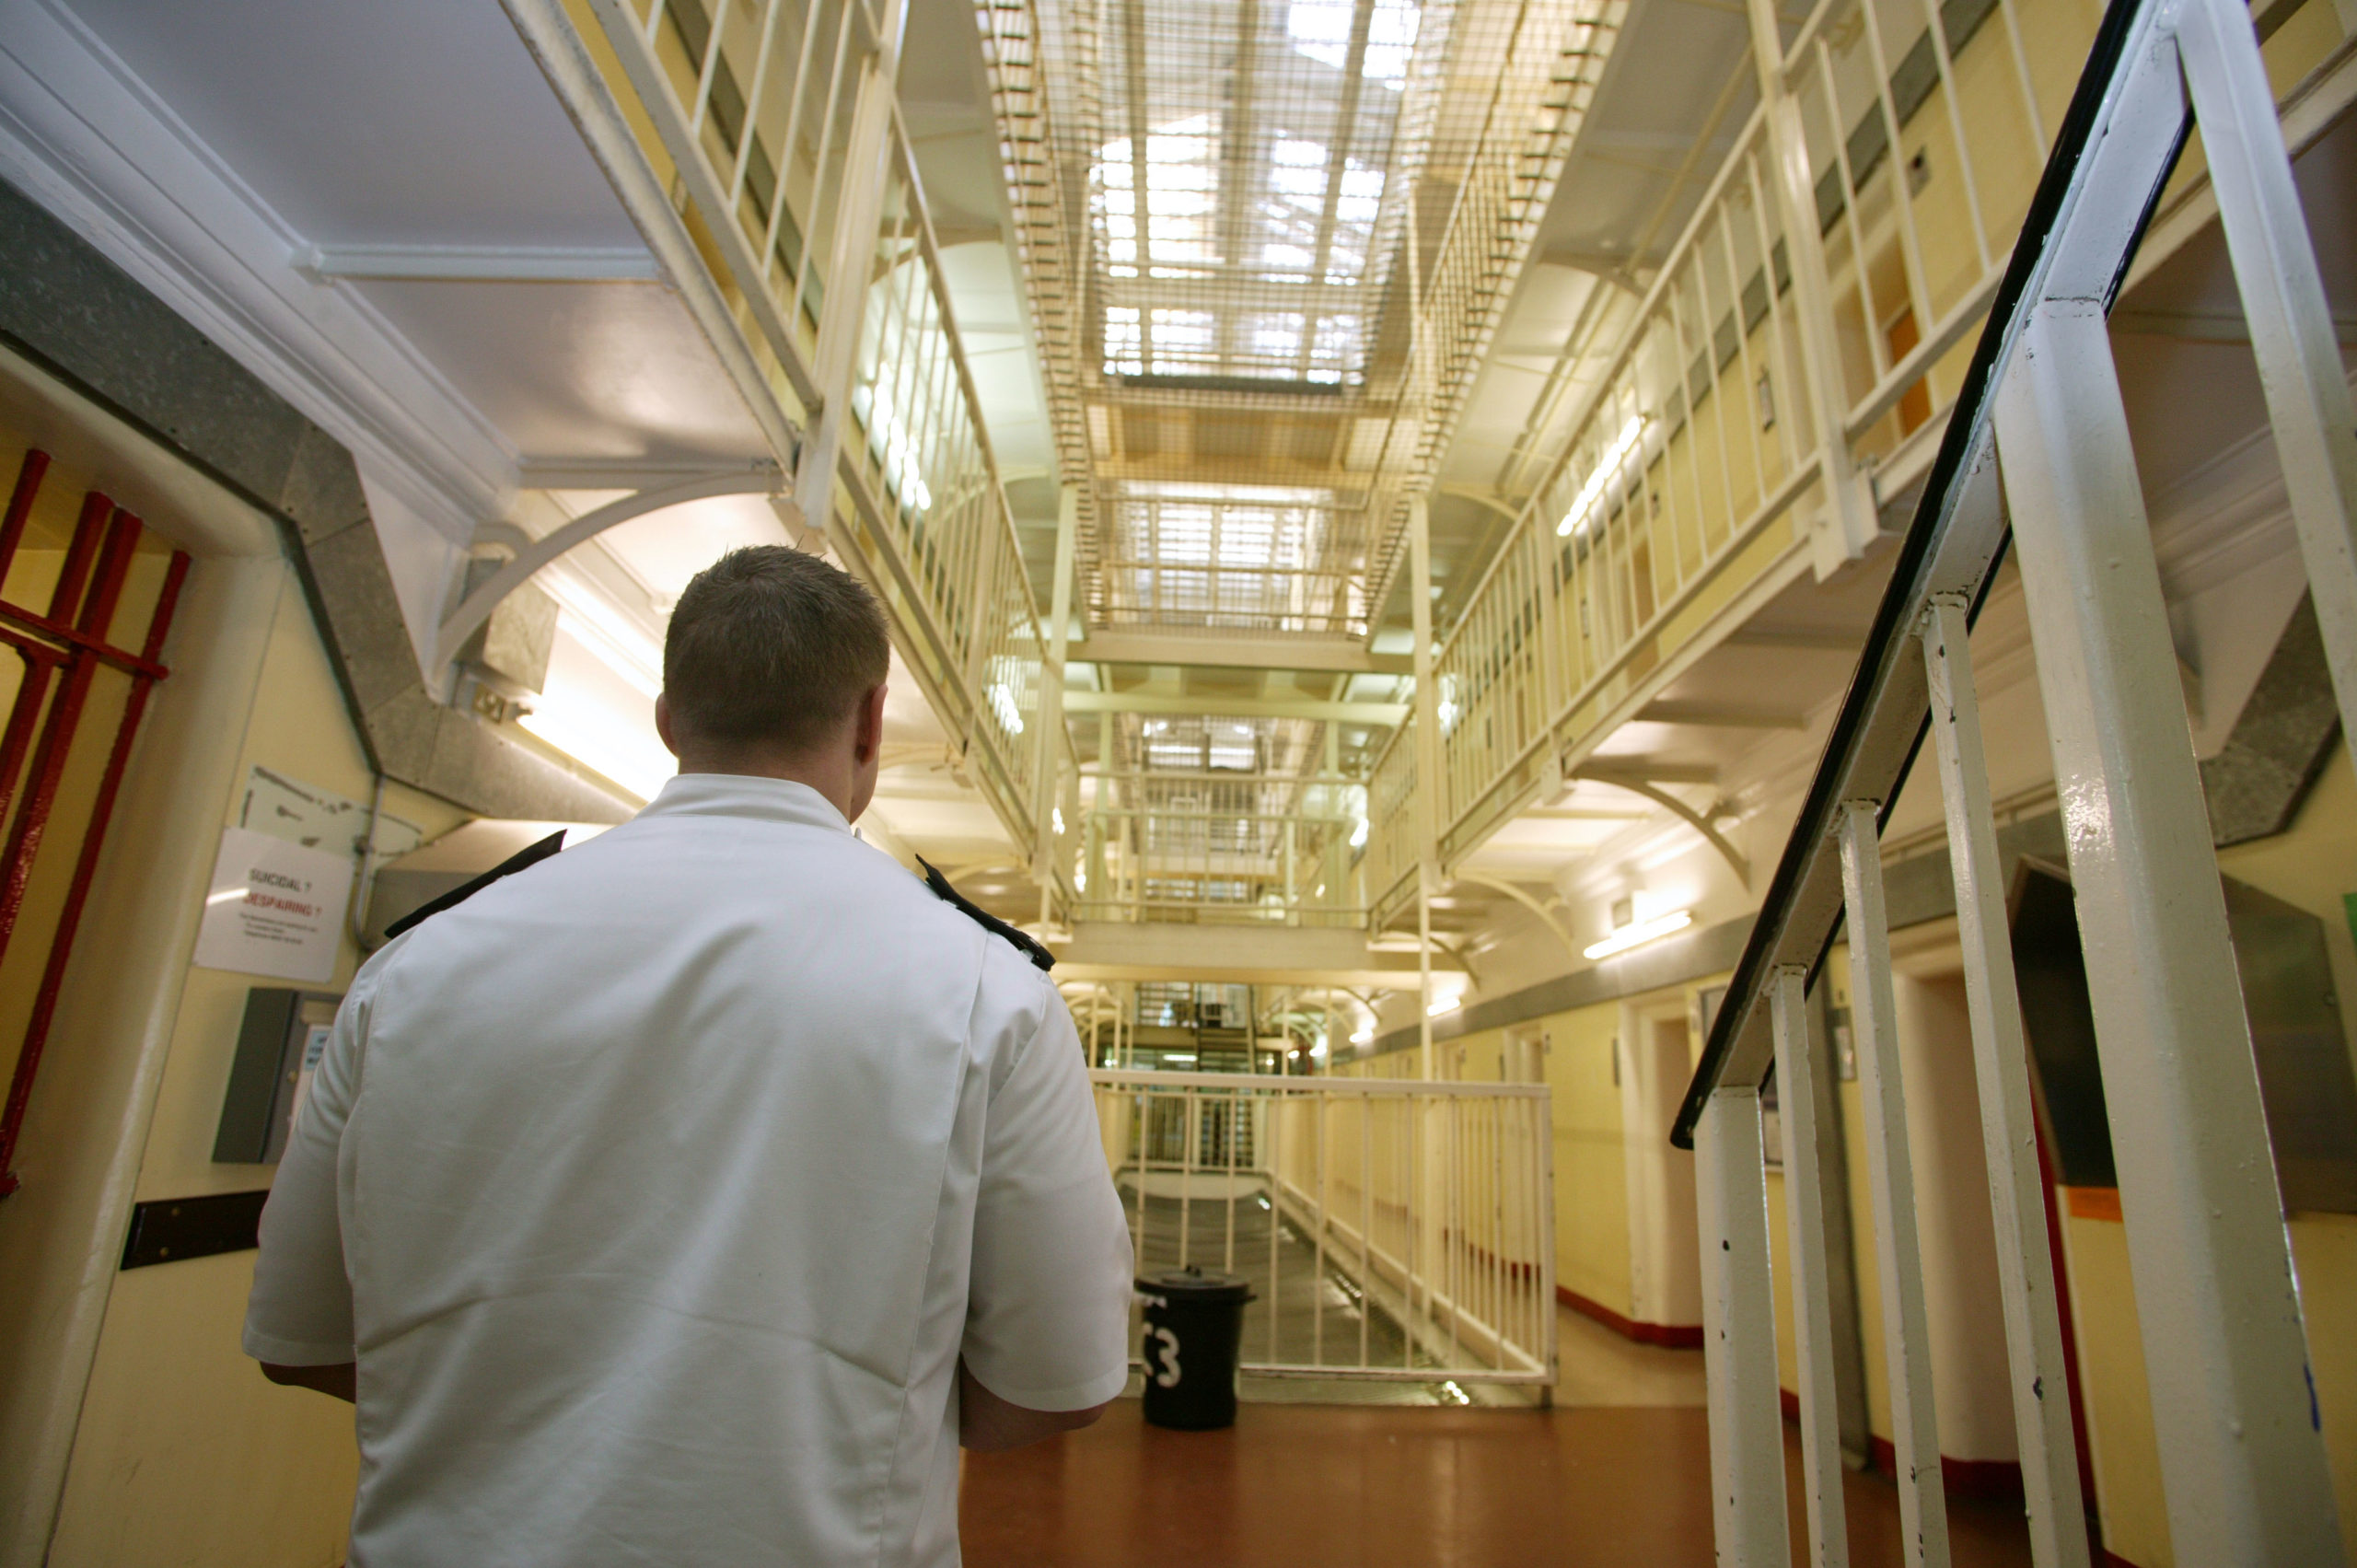 Proportion of remand prisoners from ethnic minorities rises 17 percent in six years